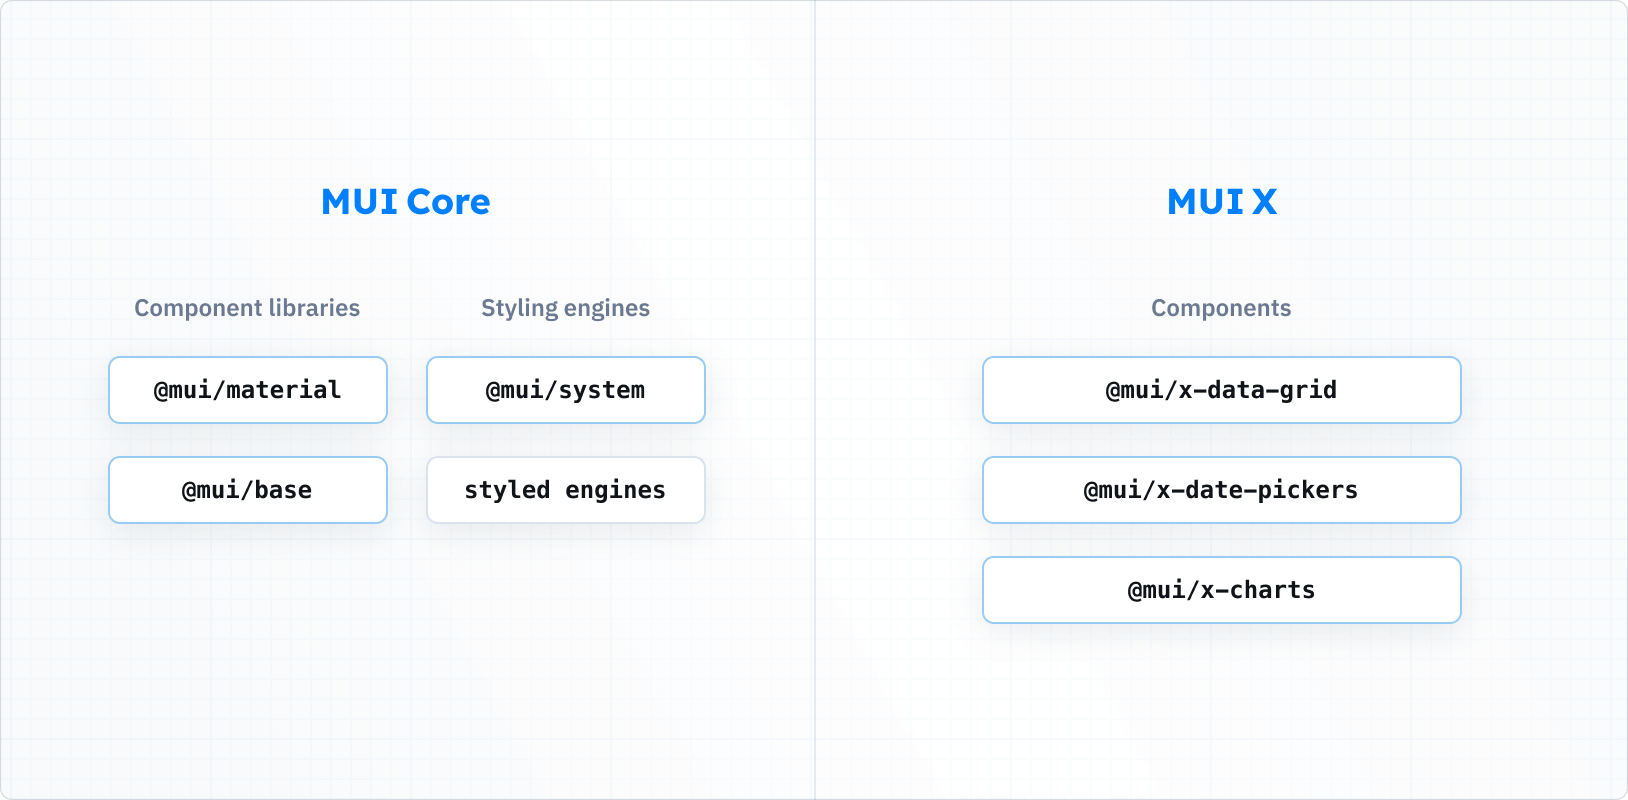 The first half of the image shows @mui/material and @mui/base as component libraries, and @mui/system and styled engines as styling solutions, both under the MUI Core umbrella. The second half shows @mui/x-data-grid and @mui/x-date-pickers as components from MUI X.